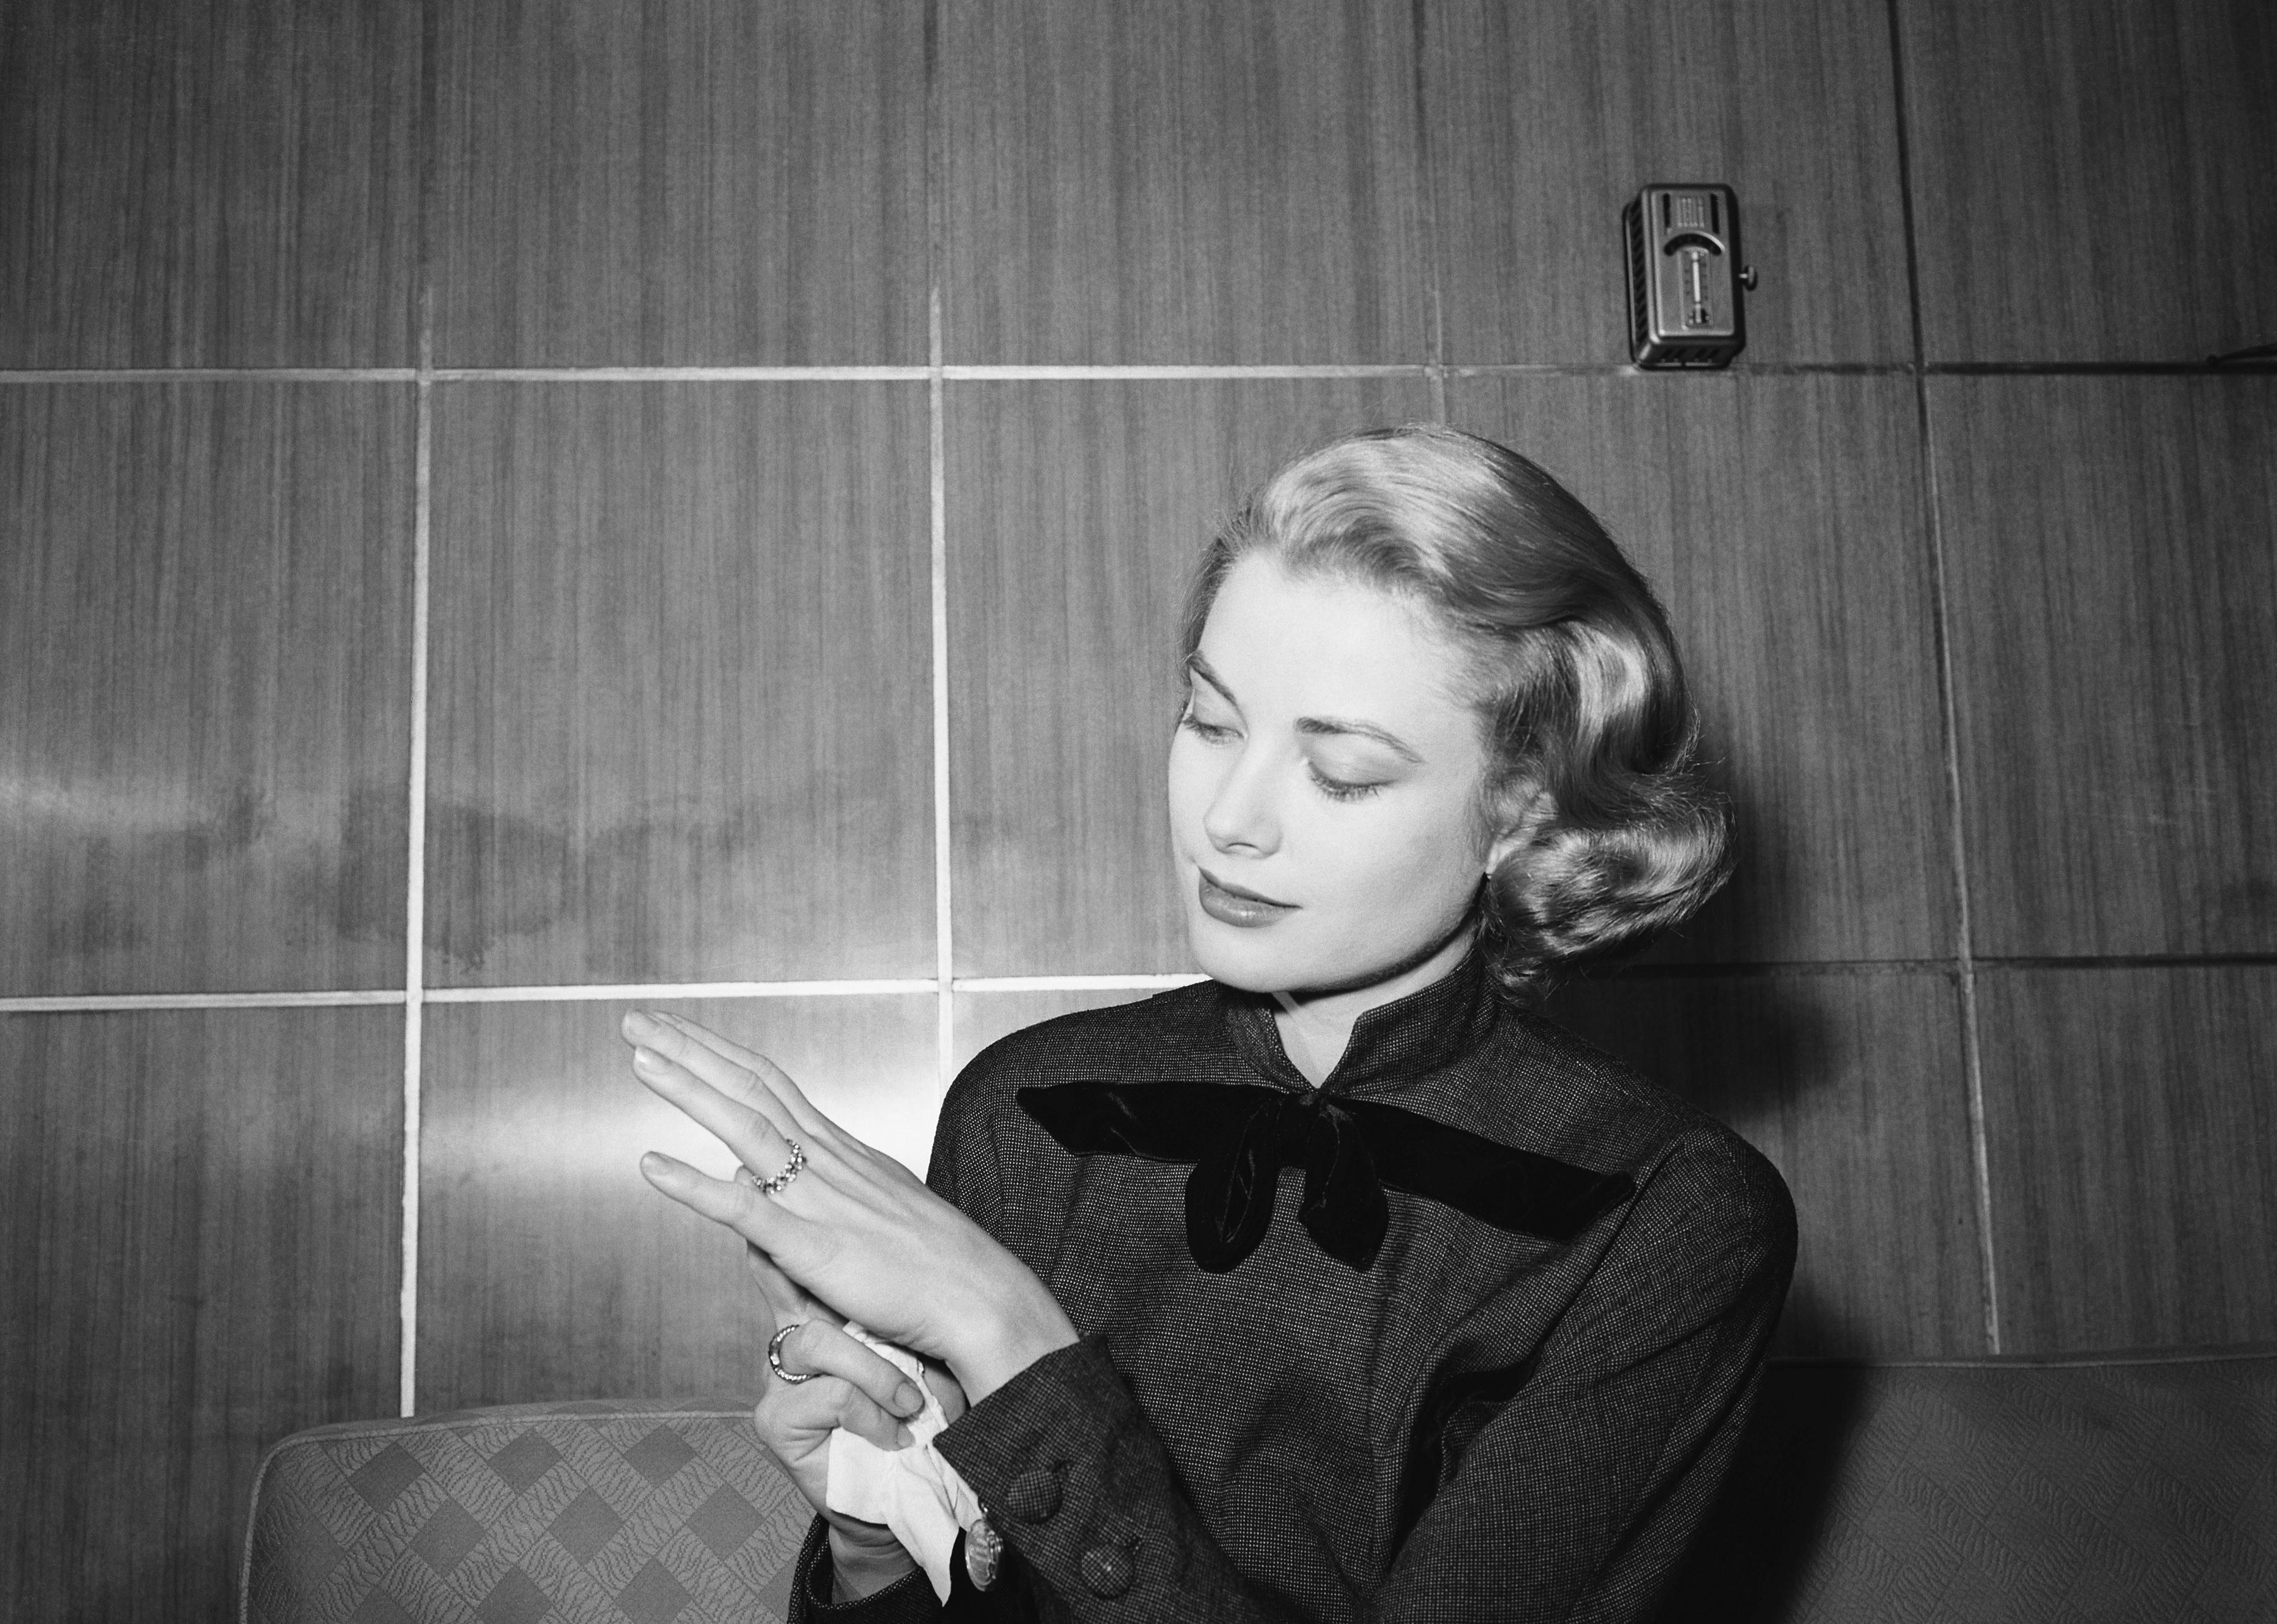 Grace Kelly strikes a pose to show off her engagement ring.